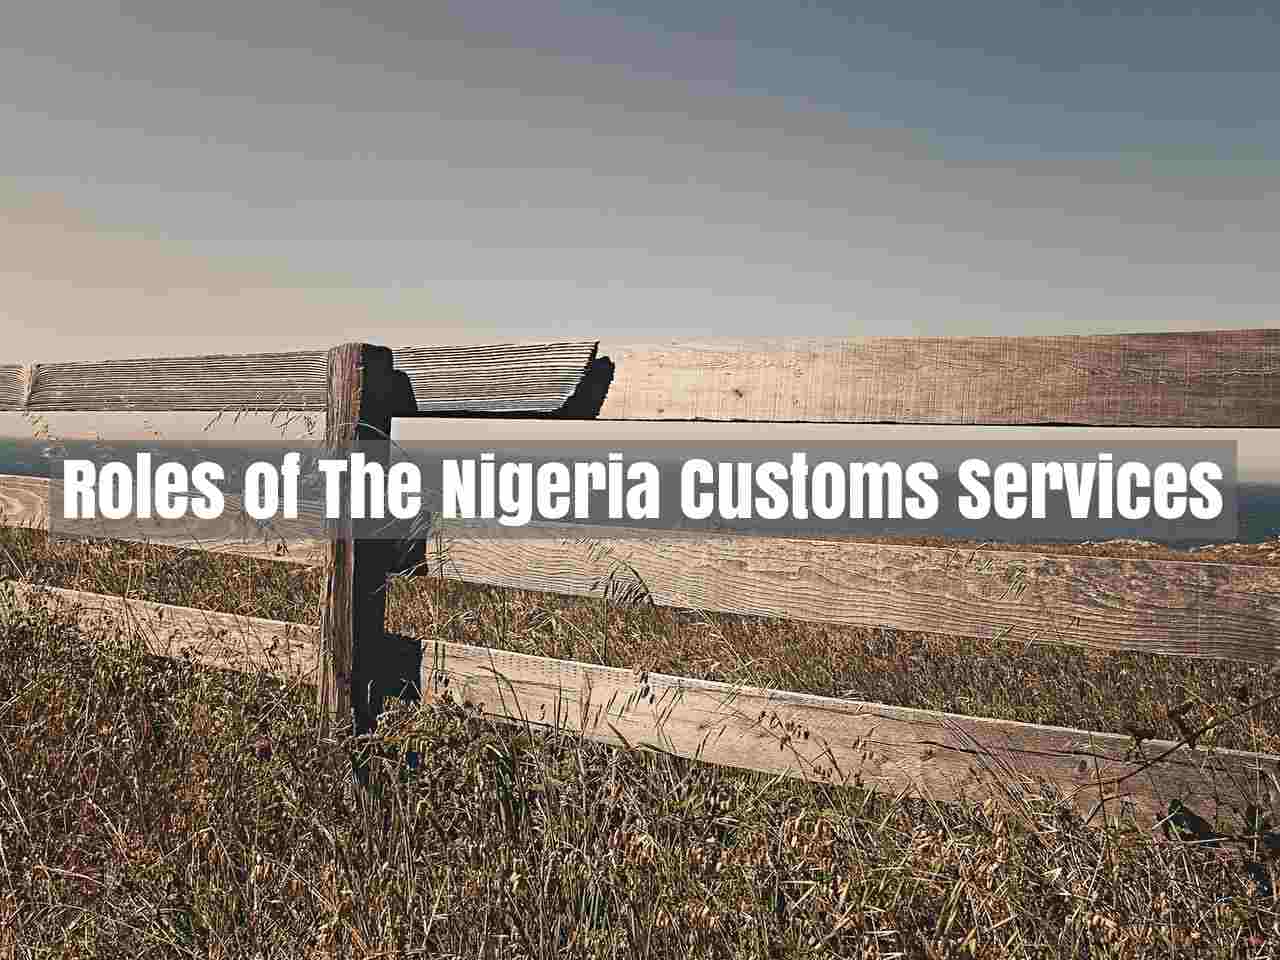 Roles and Functions of the Nigeria customs Services